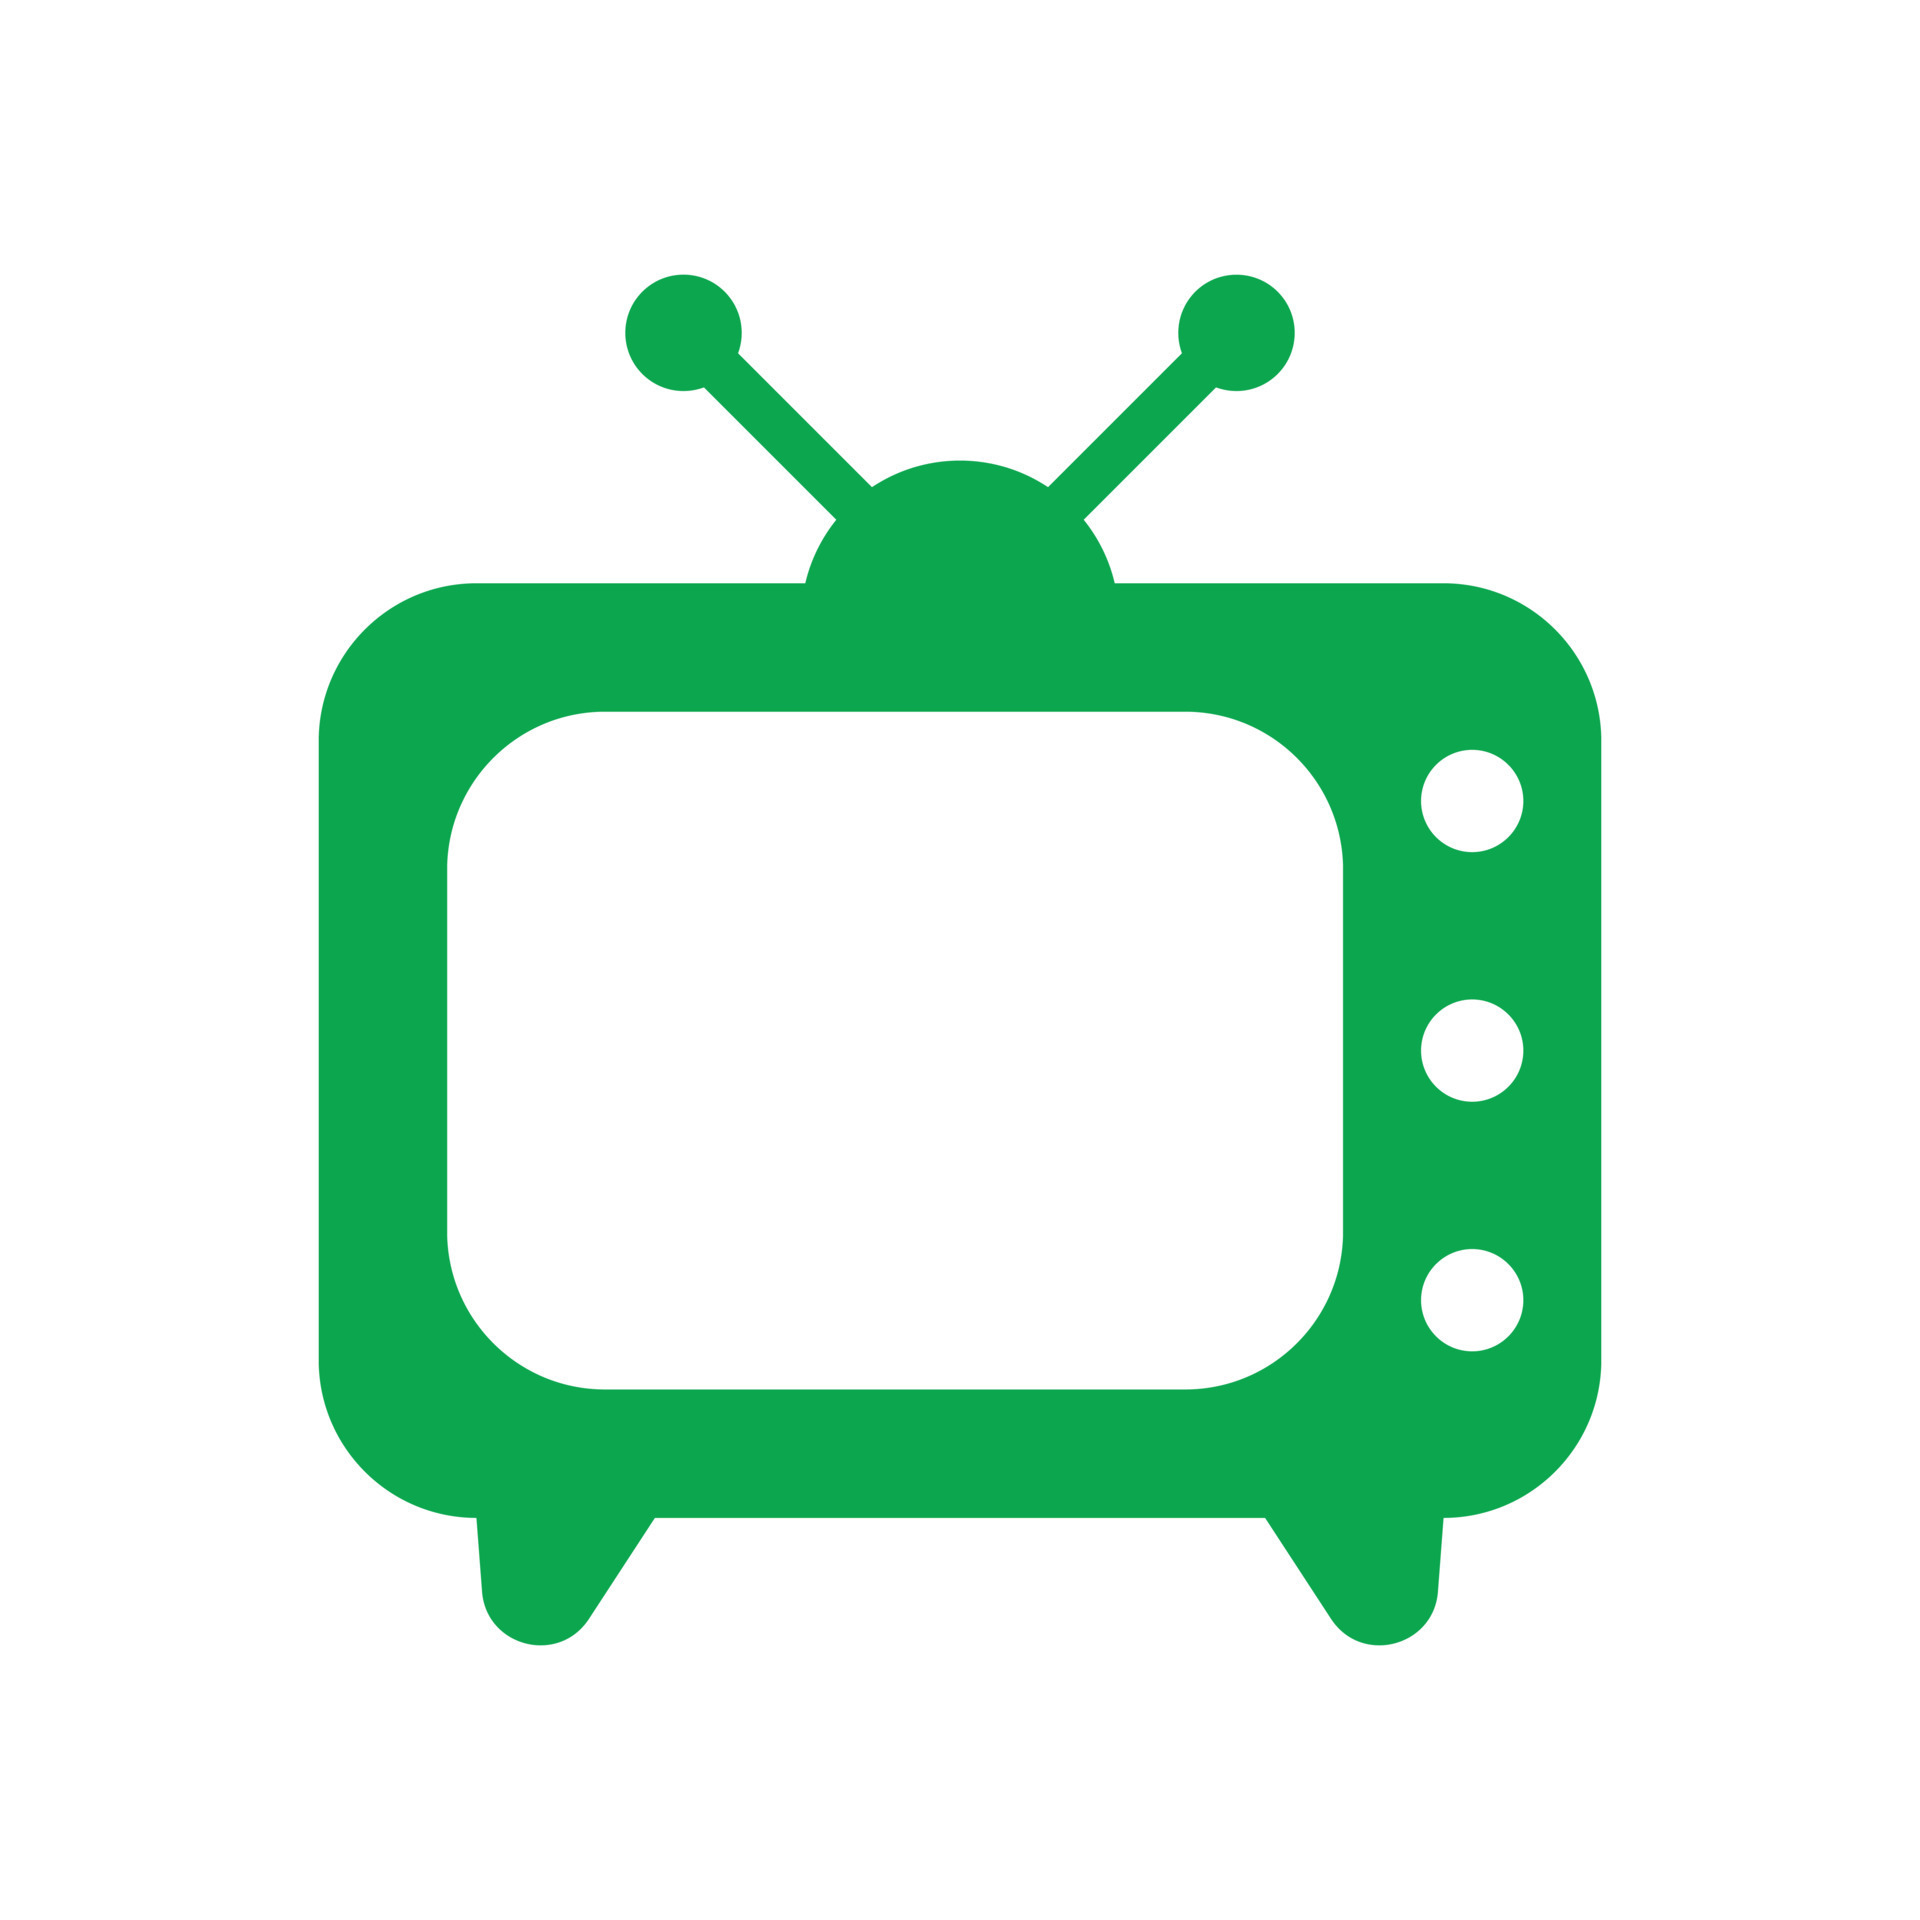 eps10 green vector TV or Television solid icon in simple flat